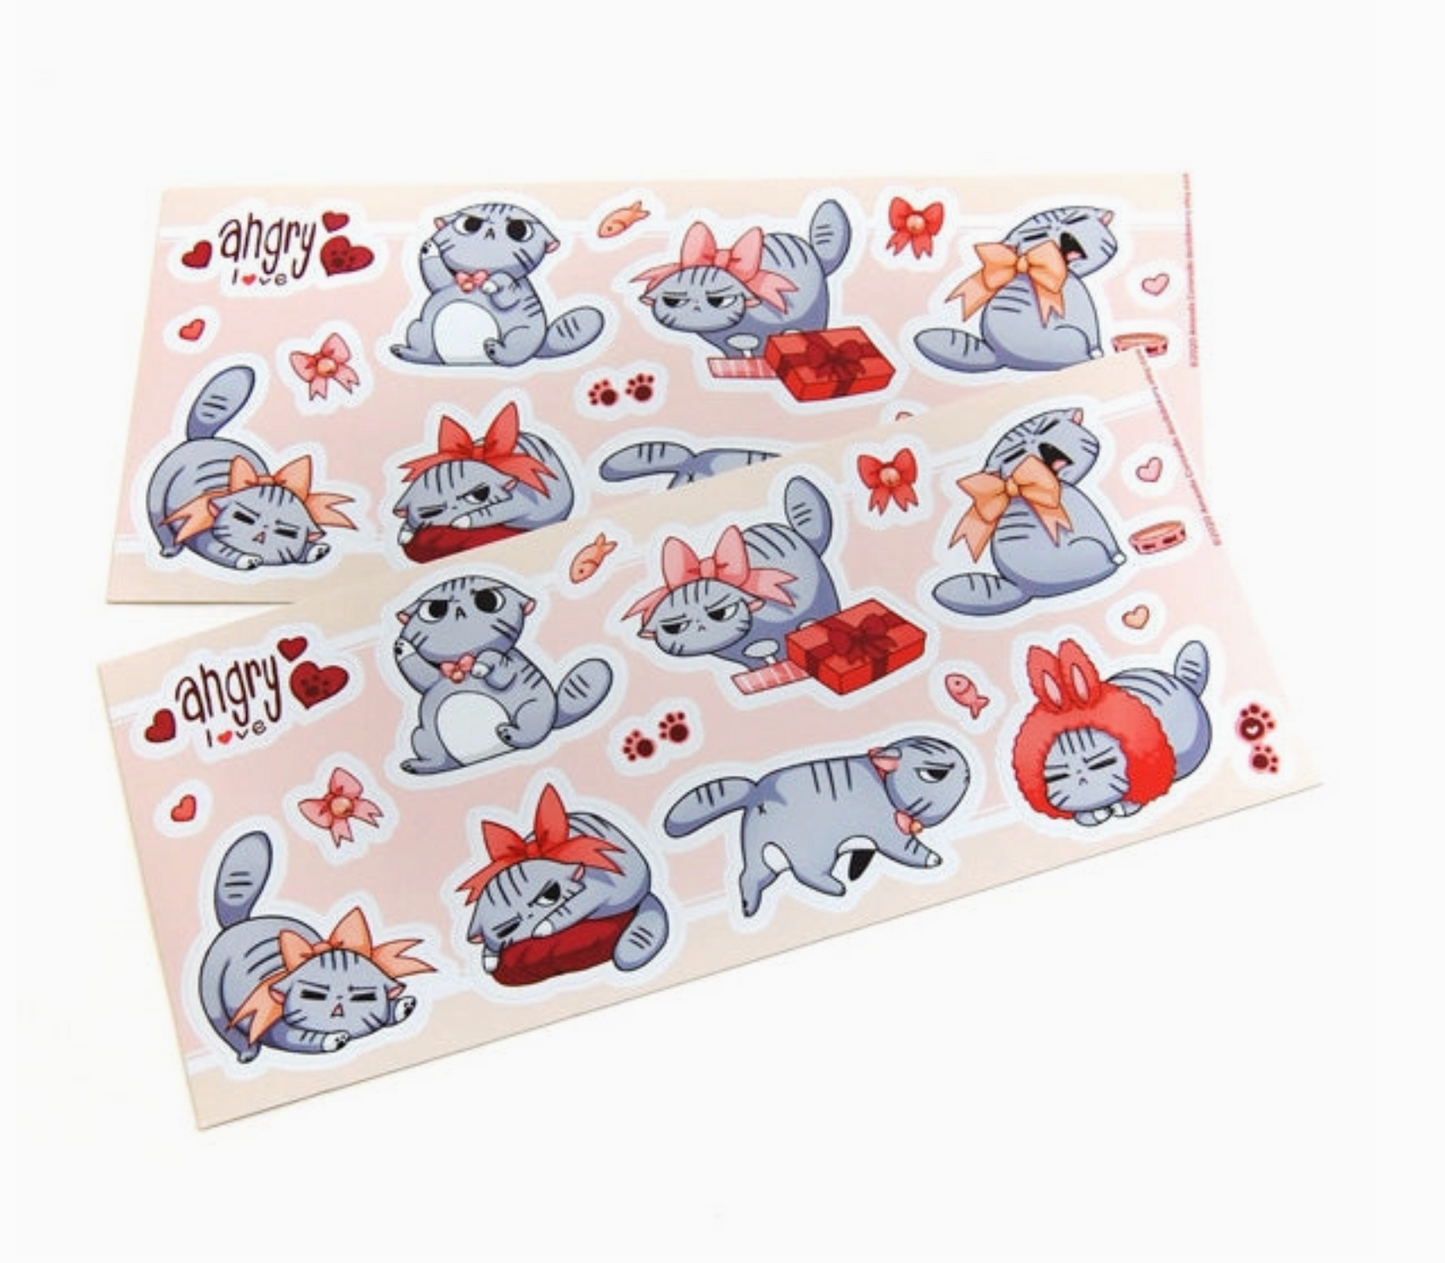 Angry Love Angry Cat Sticker Sheet - 1 Sheet